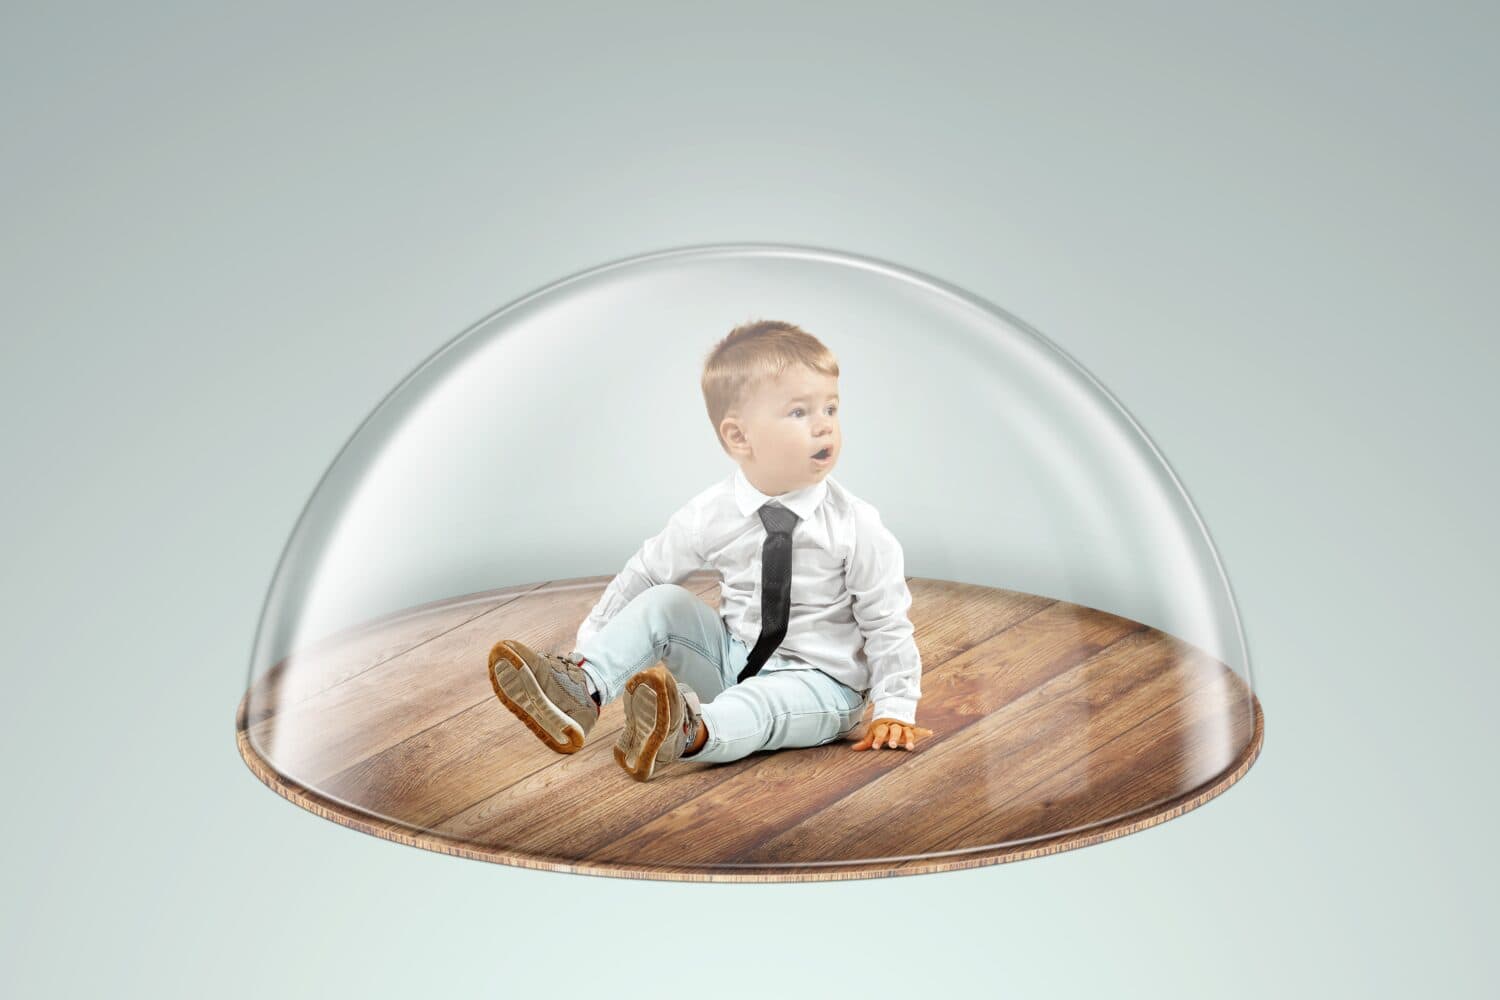 Child safety, overprotection, a little boy sits under a glass dome, cap. Vaccinations, protection against viruses and diseases, maternal love, immunity.